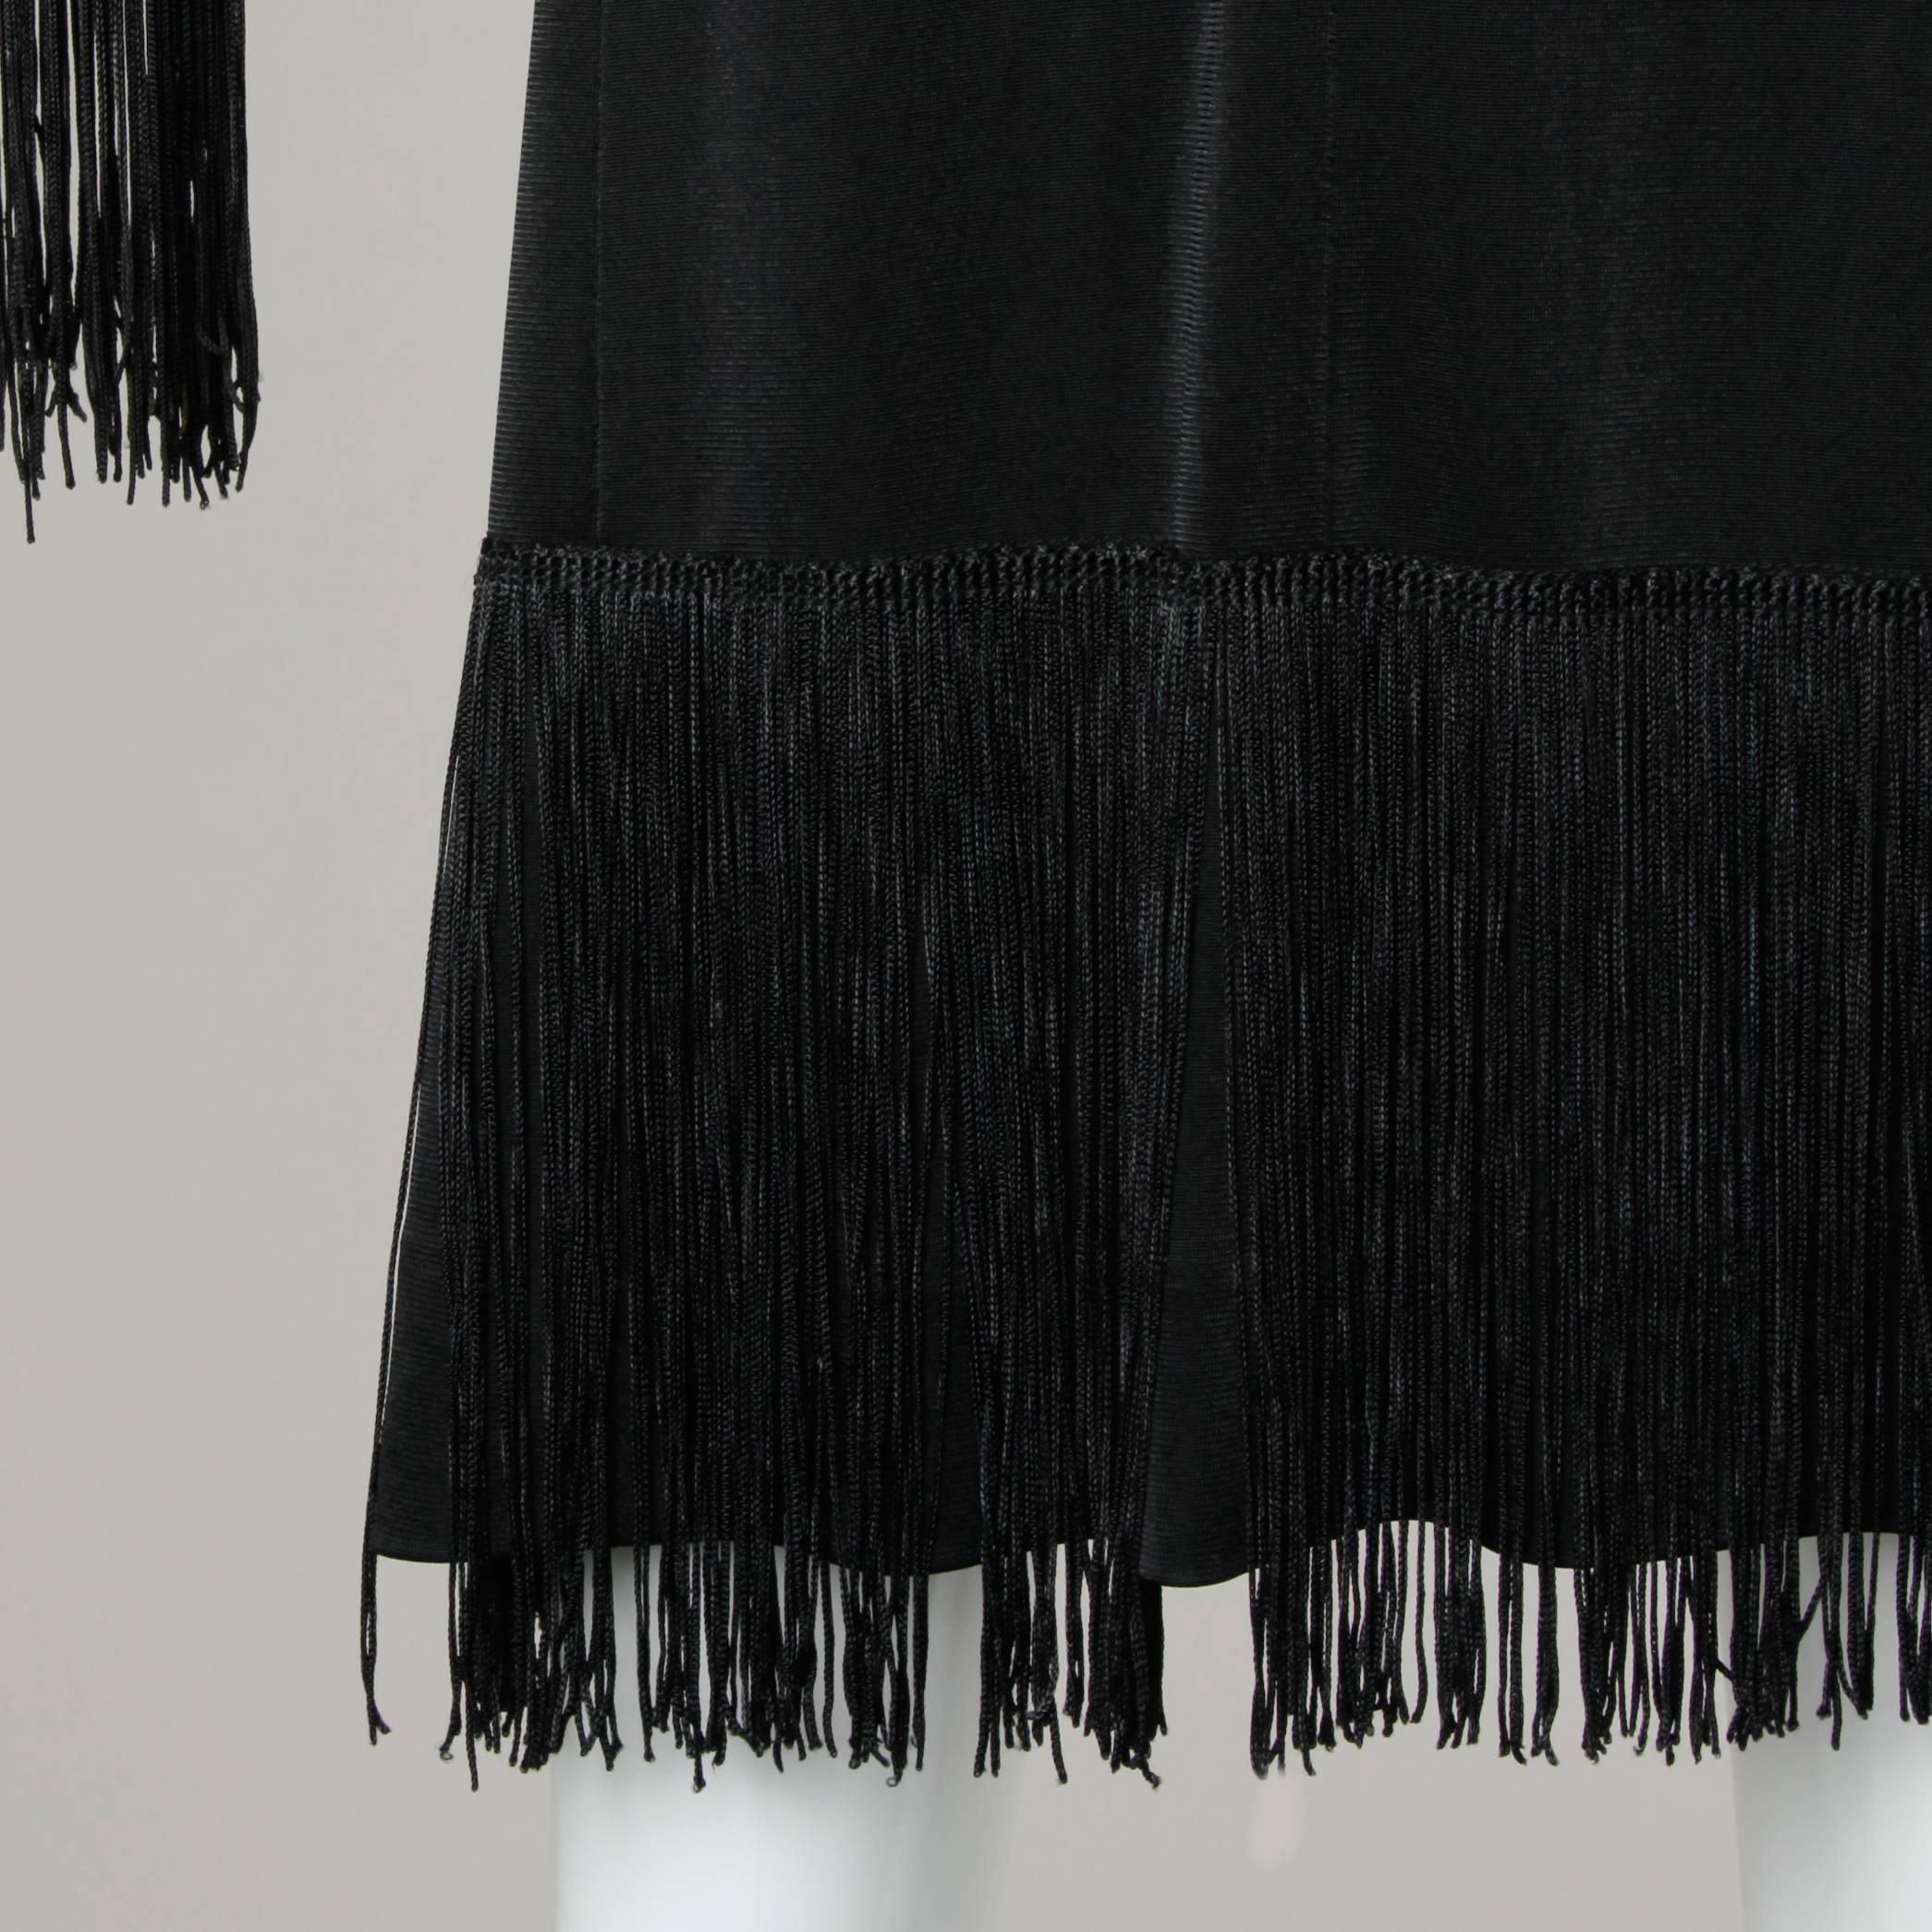 Victor Costa for Lord & Taylor 1960s Black Mod Fringe Cocktail Dress In Excellent Condition For Sale In Sparks, NV